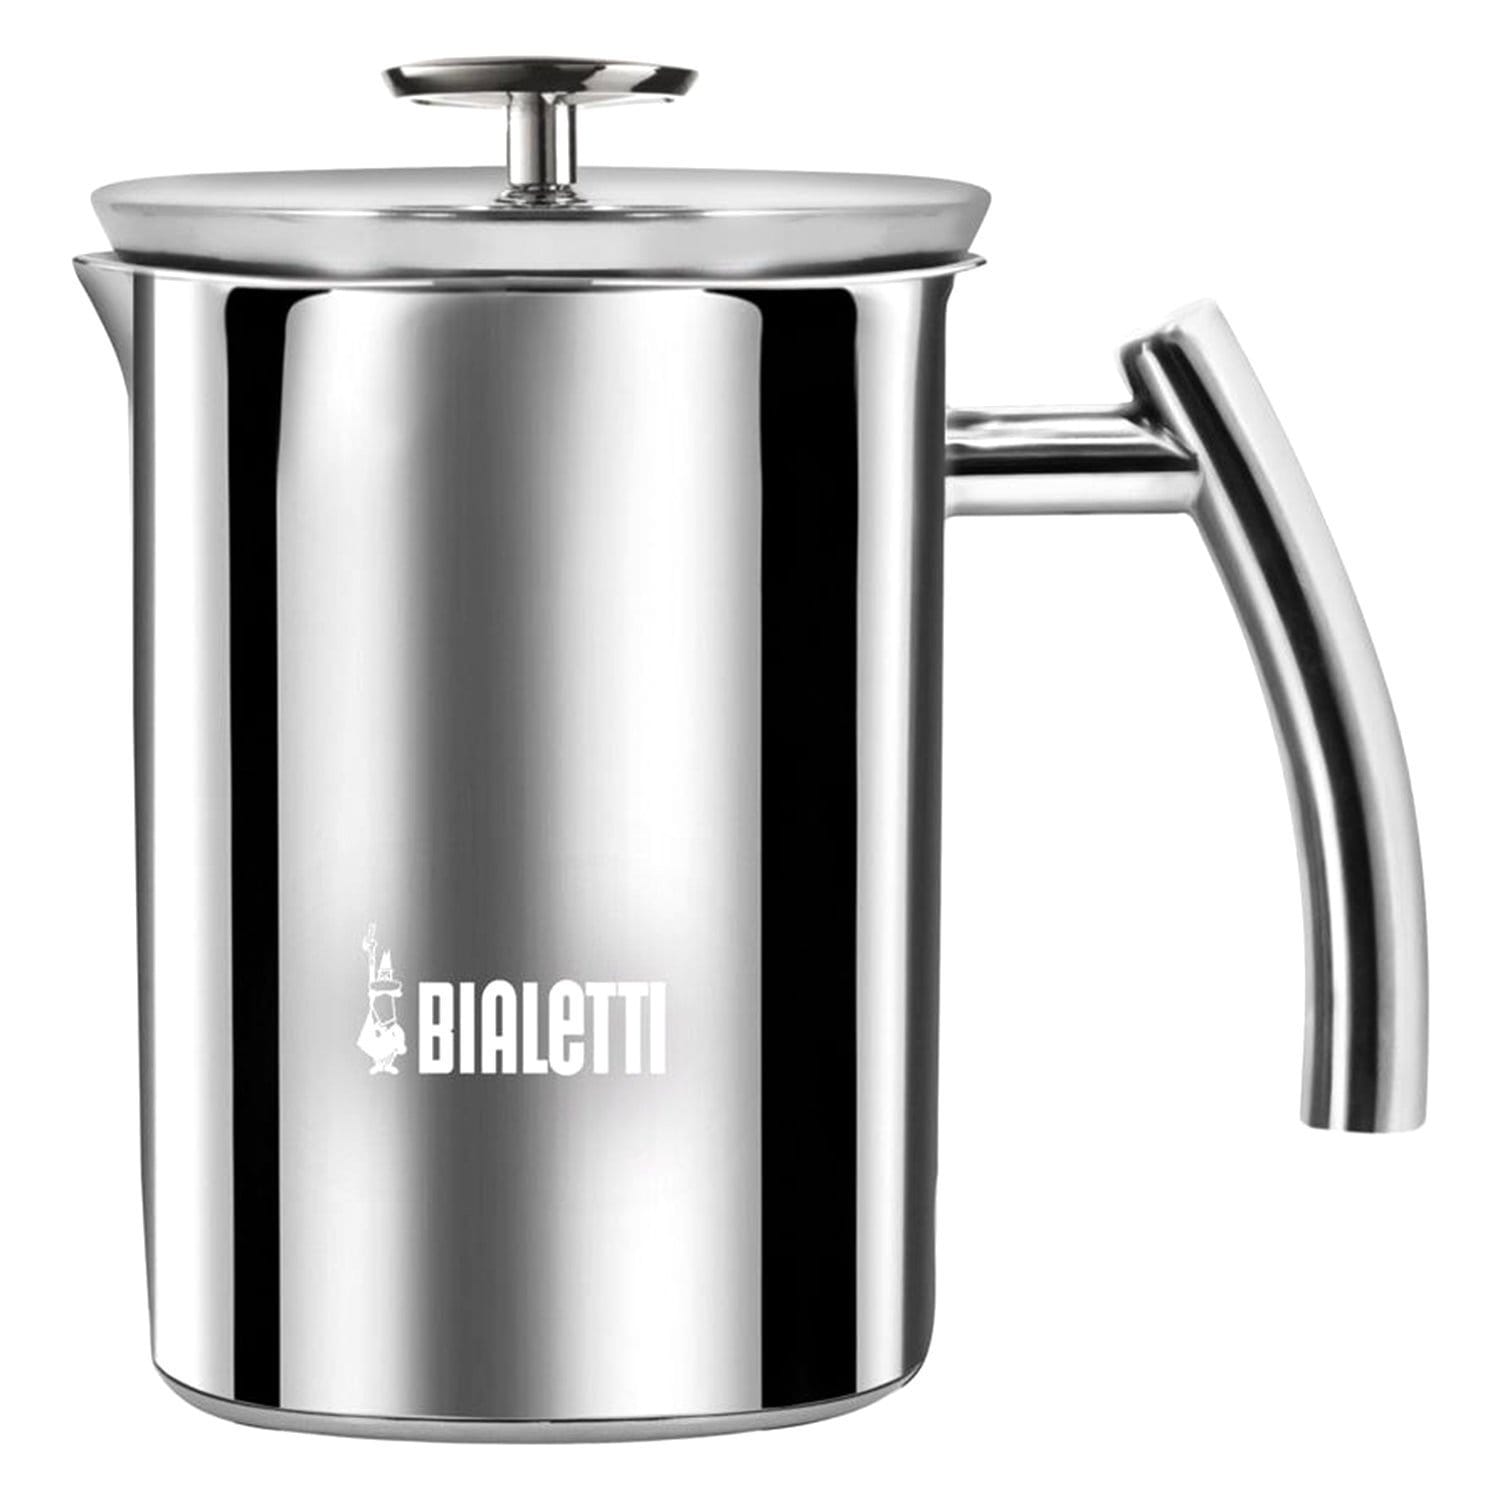 Bialetti Milk Frother - Silver, 1 Litre - 4420 - Jashanmal Home